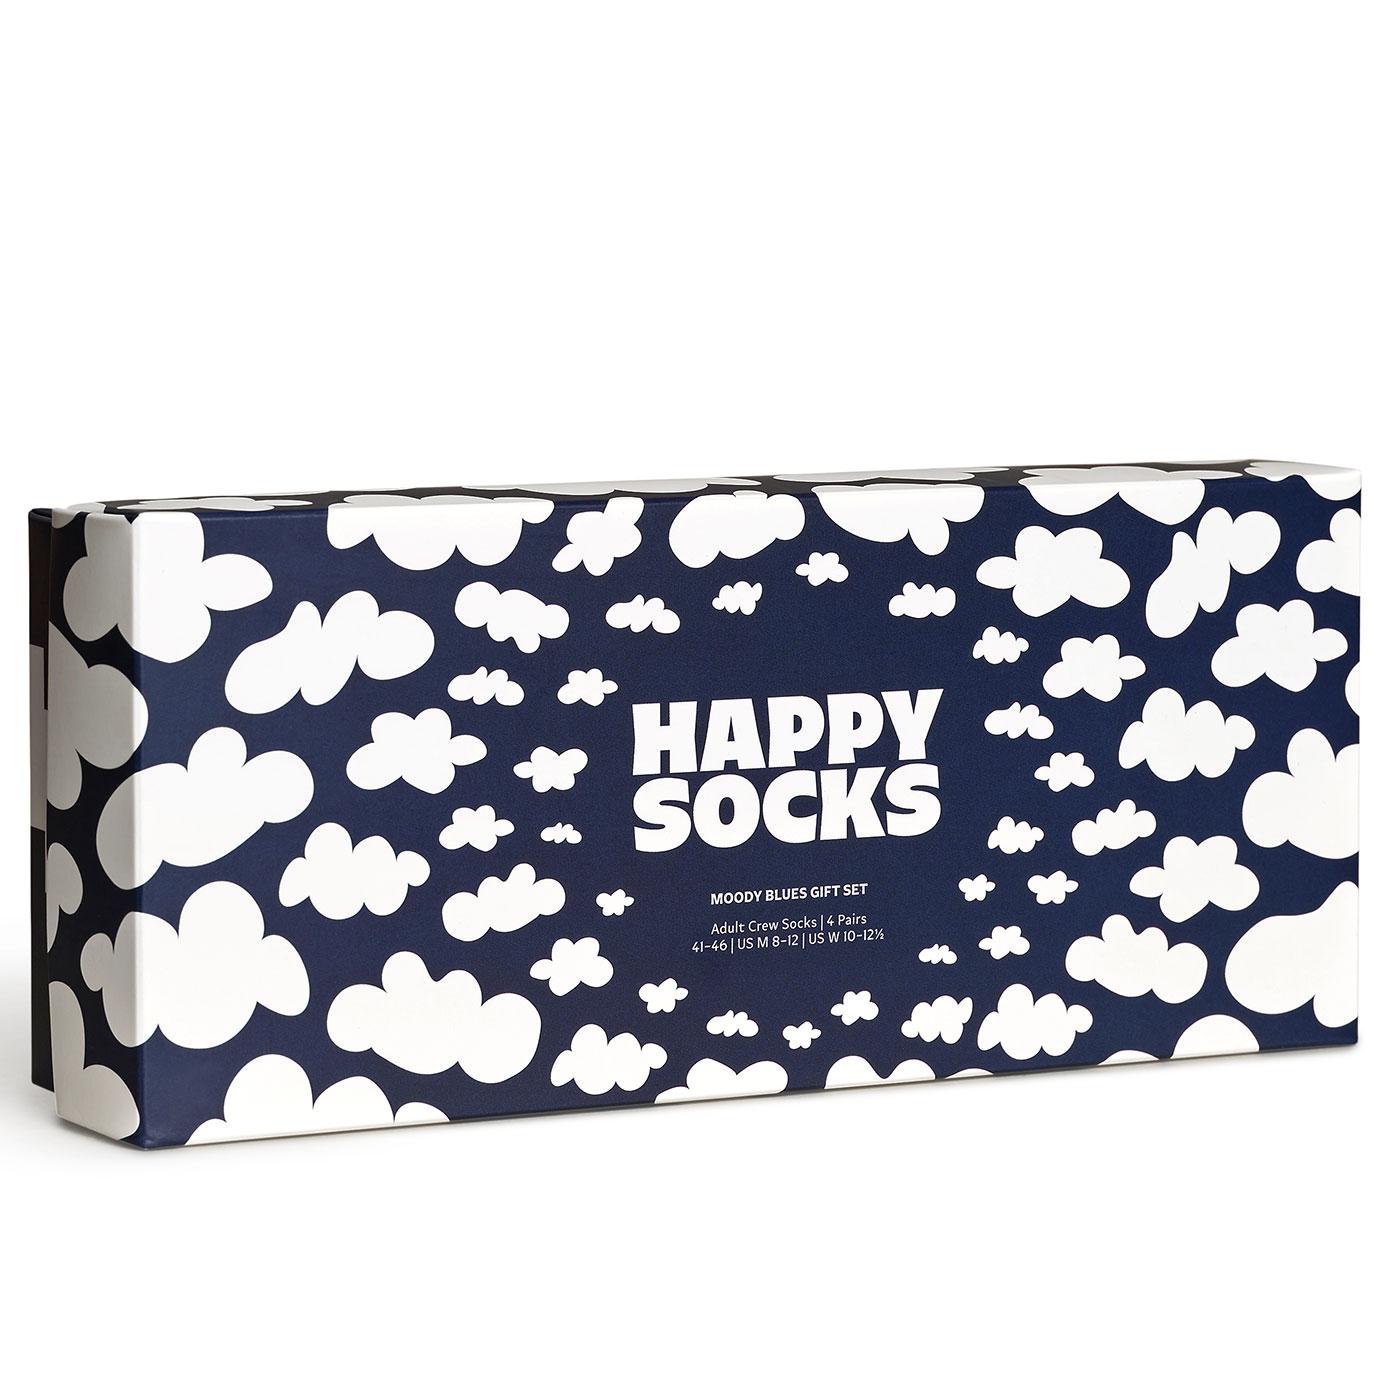 Pack Moody Blues Boxed Navy Gift Blue Happy Four Socks Set